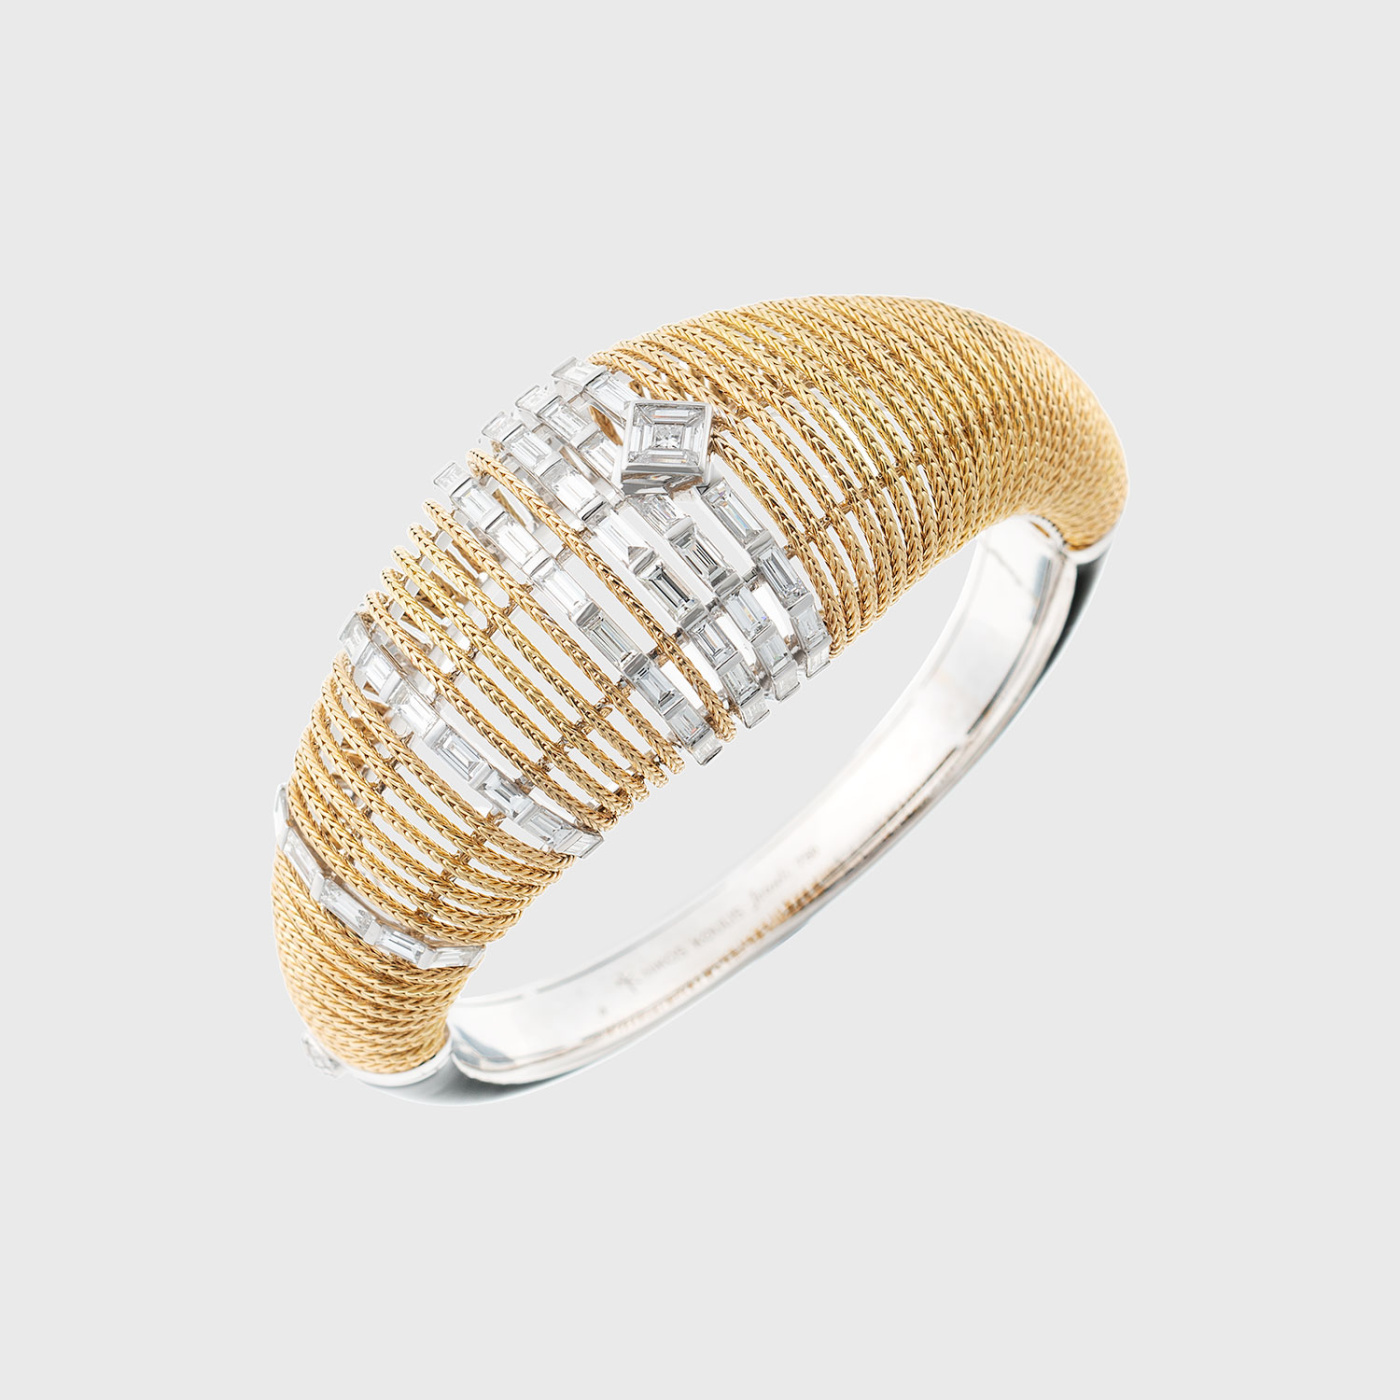 Yellow gold cuff bracelet with white diamond baguettes and black enamel